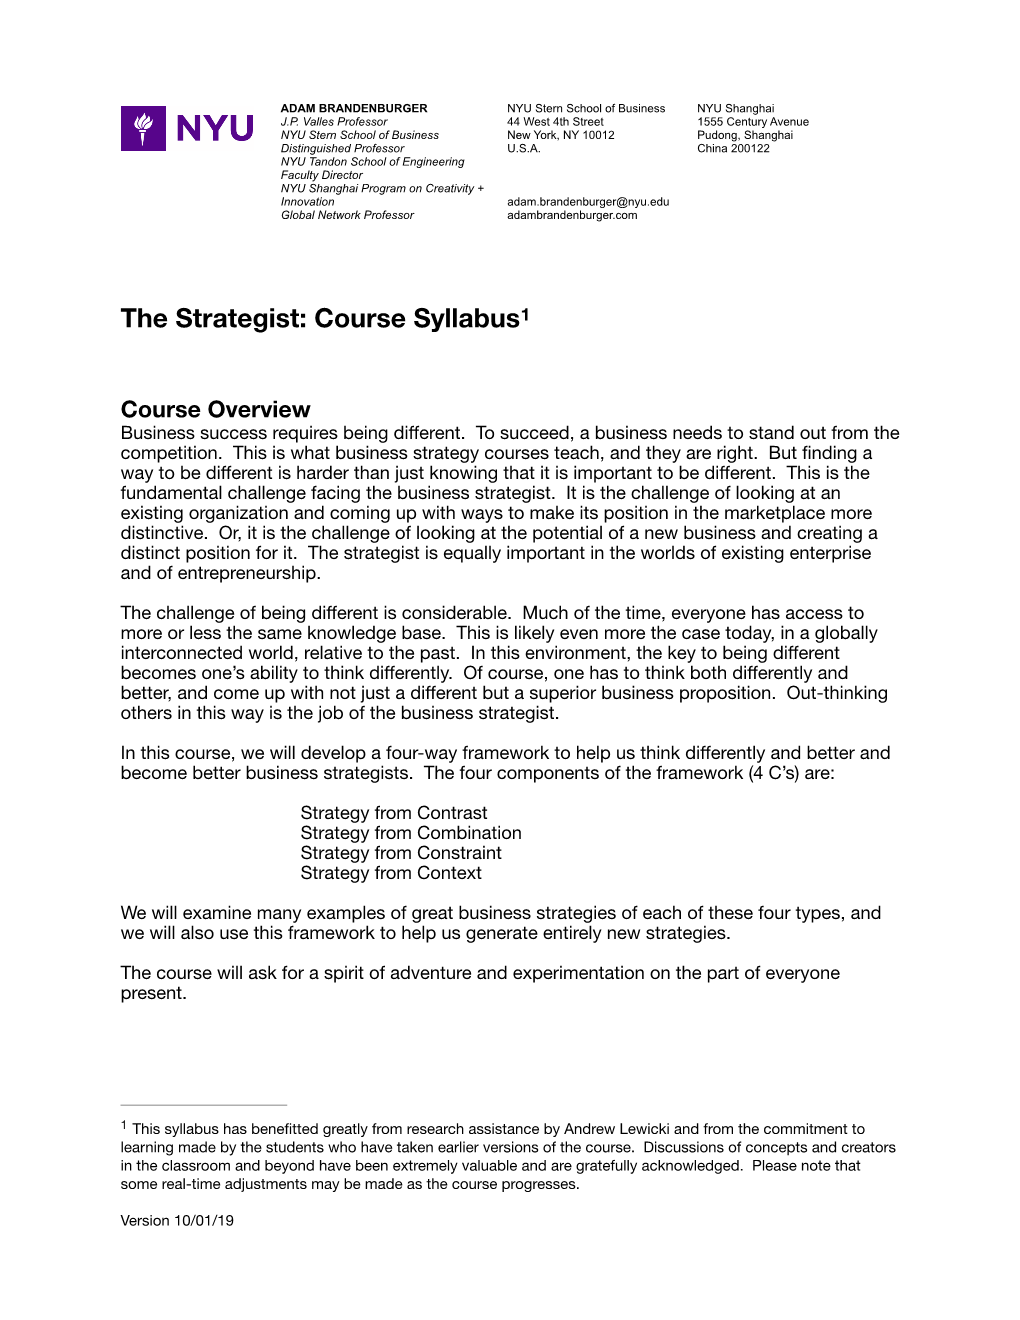 The Strategist: Course Syllabus1